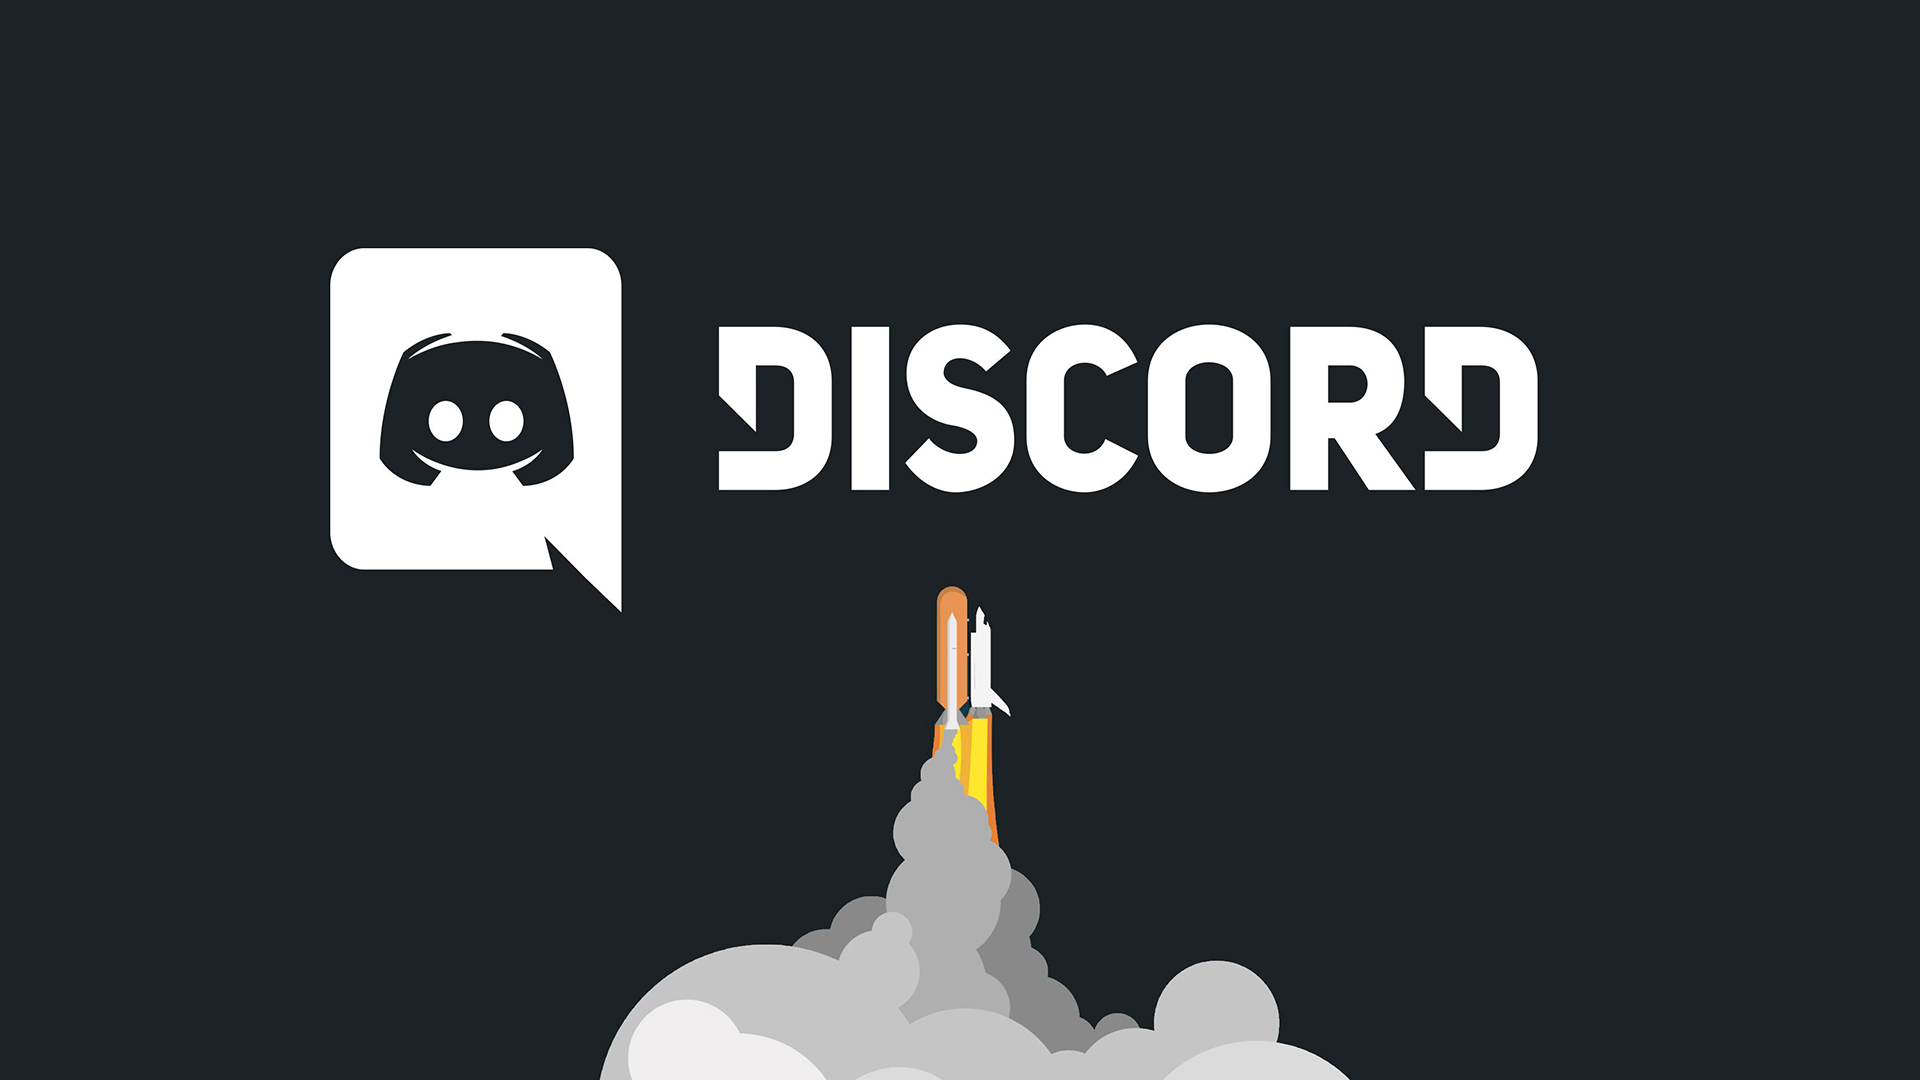 Discord Minimalism Spaceship Icons Typography Simple Background Space Shuttle Rocket Simple 1920x1080